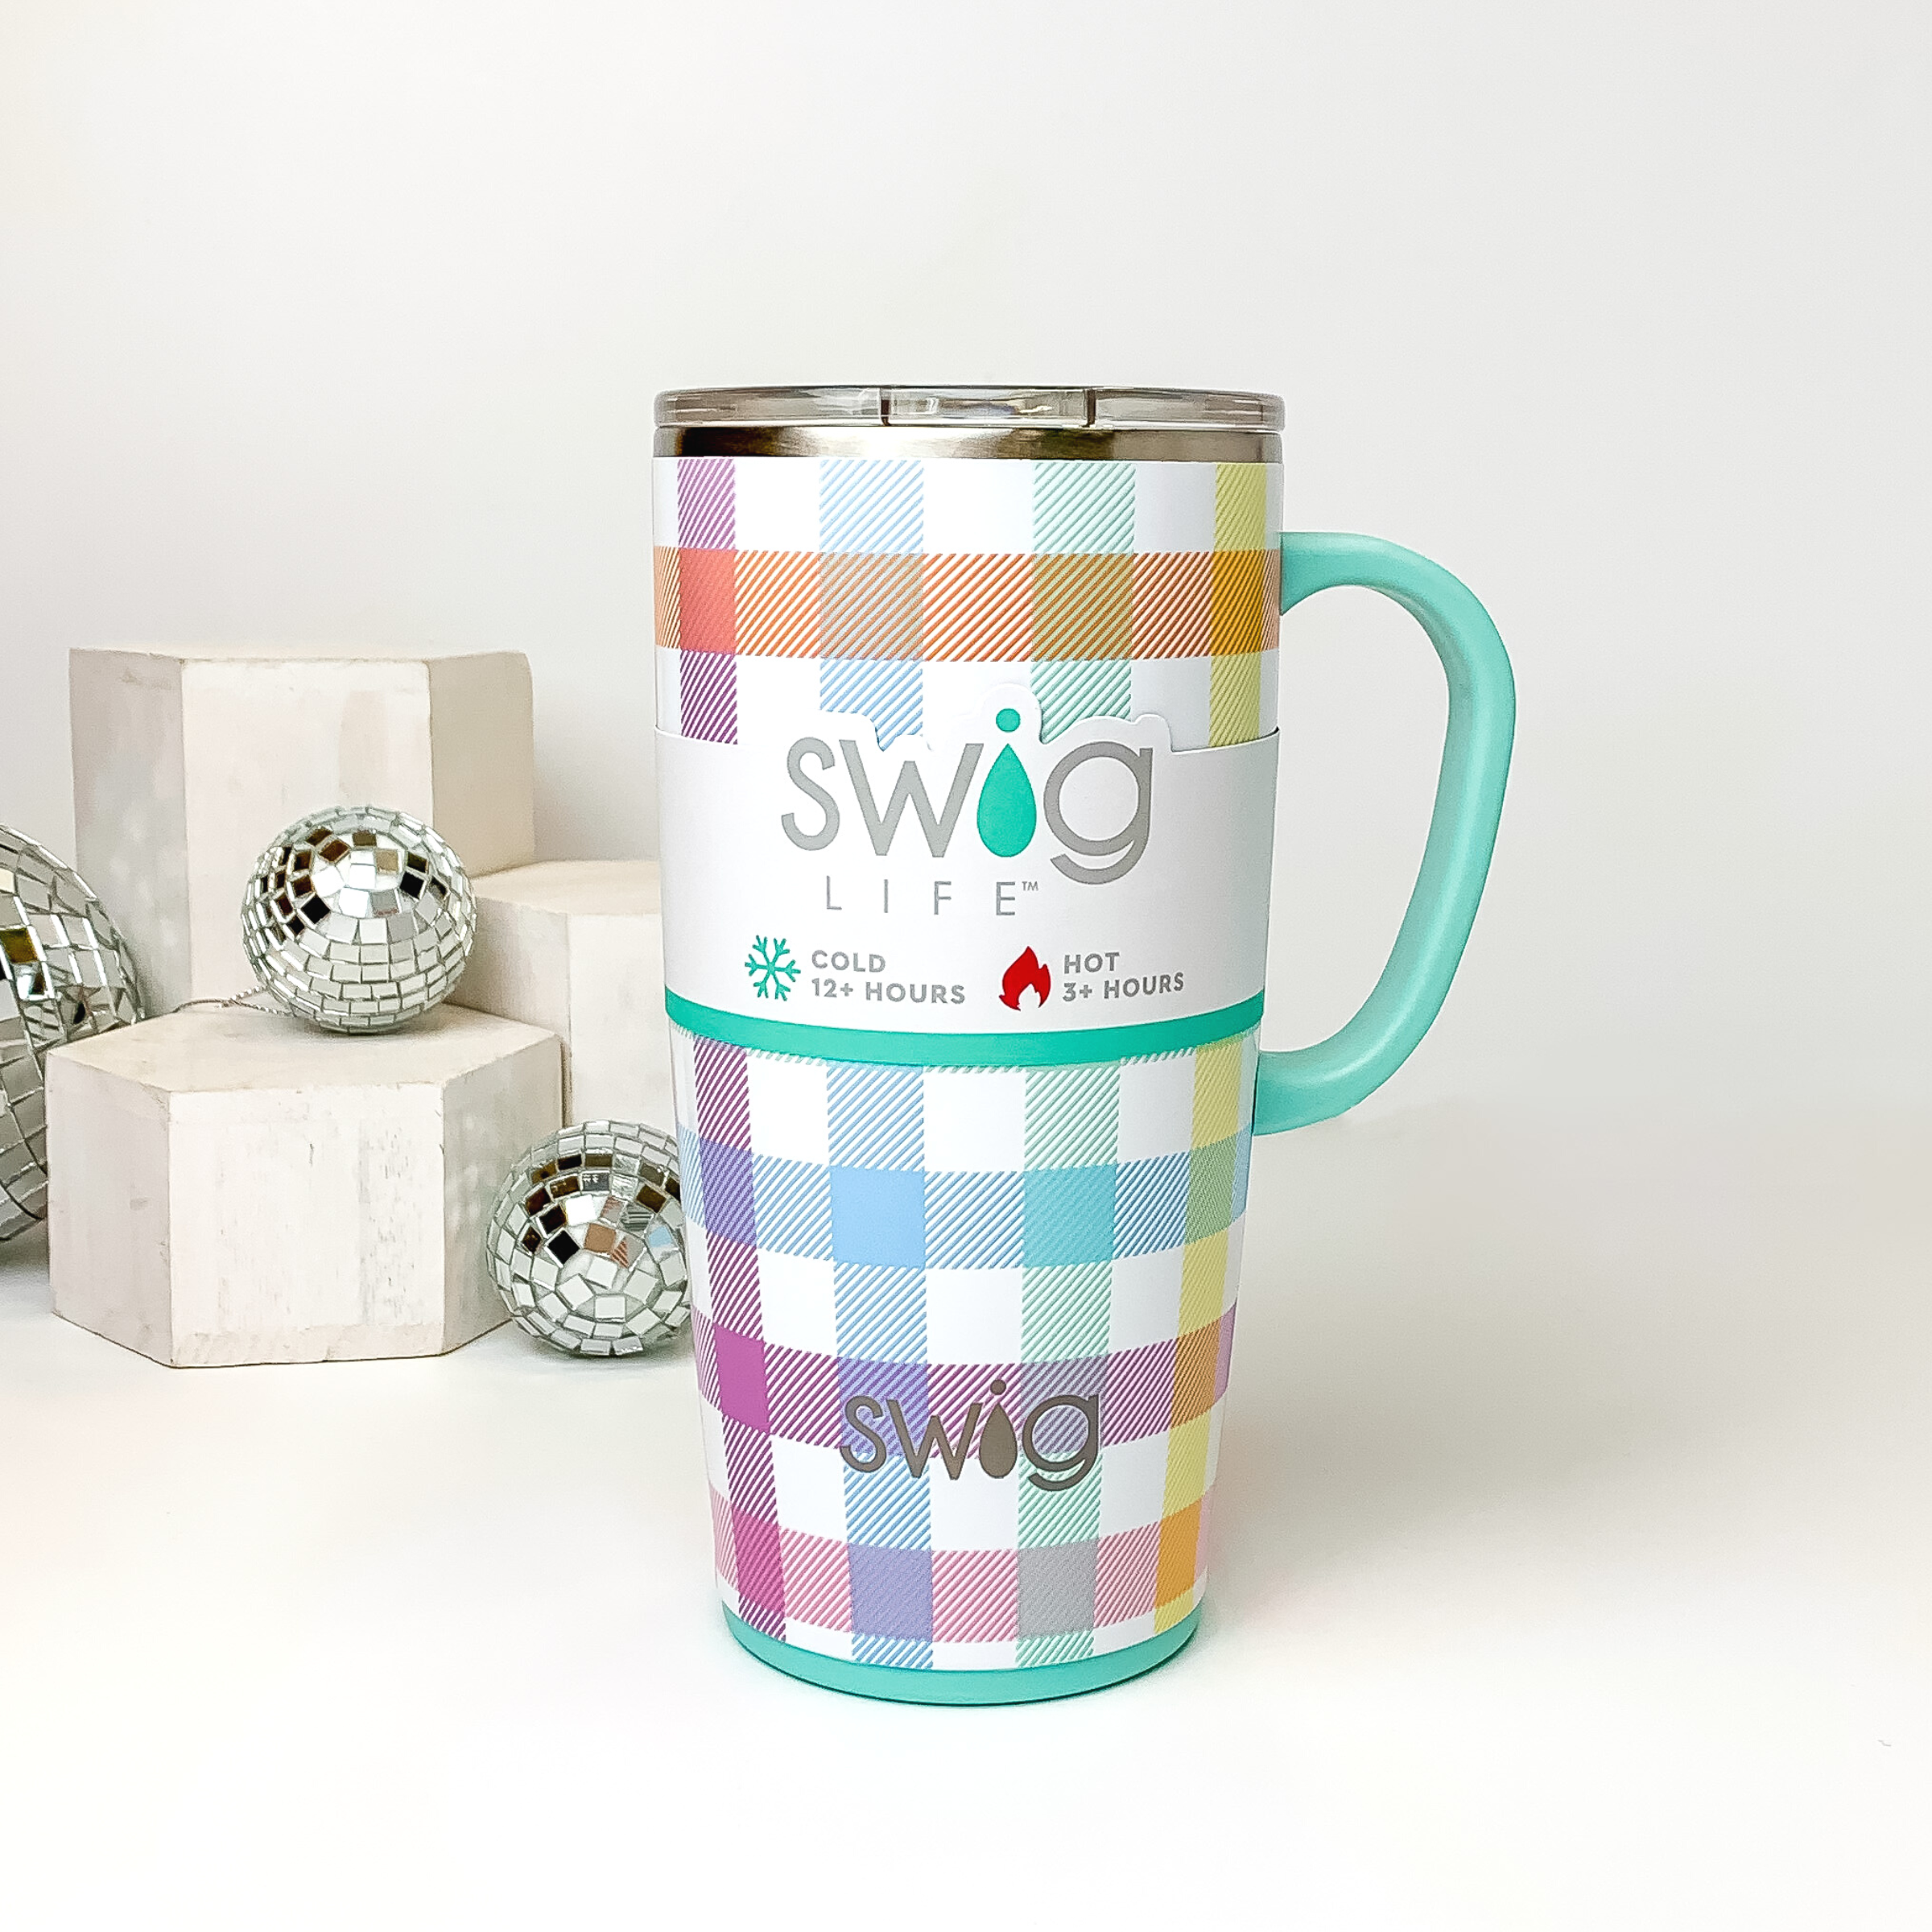 Multicolor plaid print on a white mug with a clear lid and light aqua handle. This mug is pictured on a white background with white blocks and disco balls on the left side of the picture. 